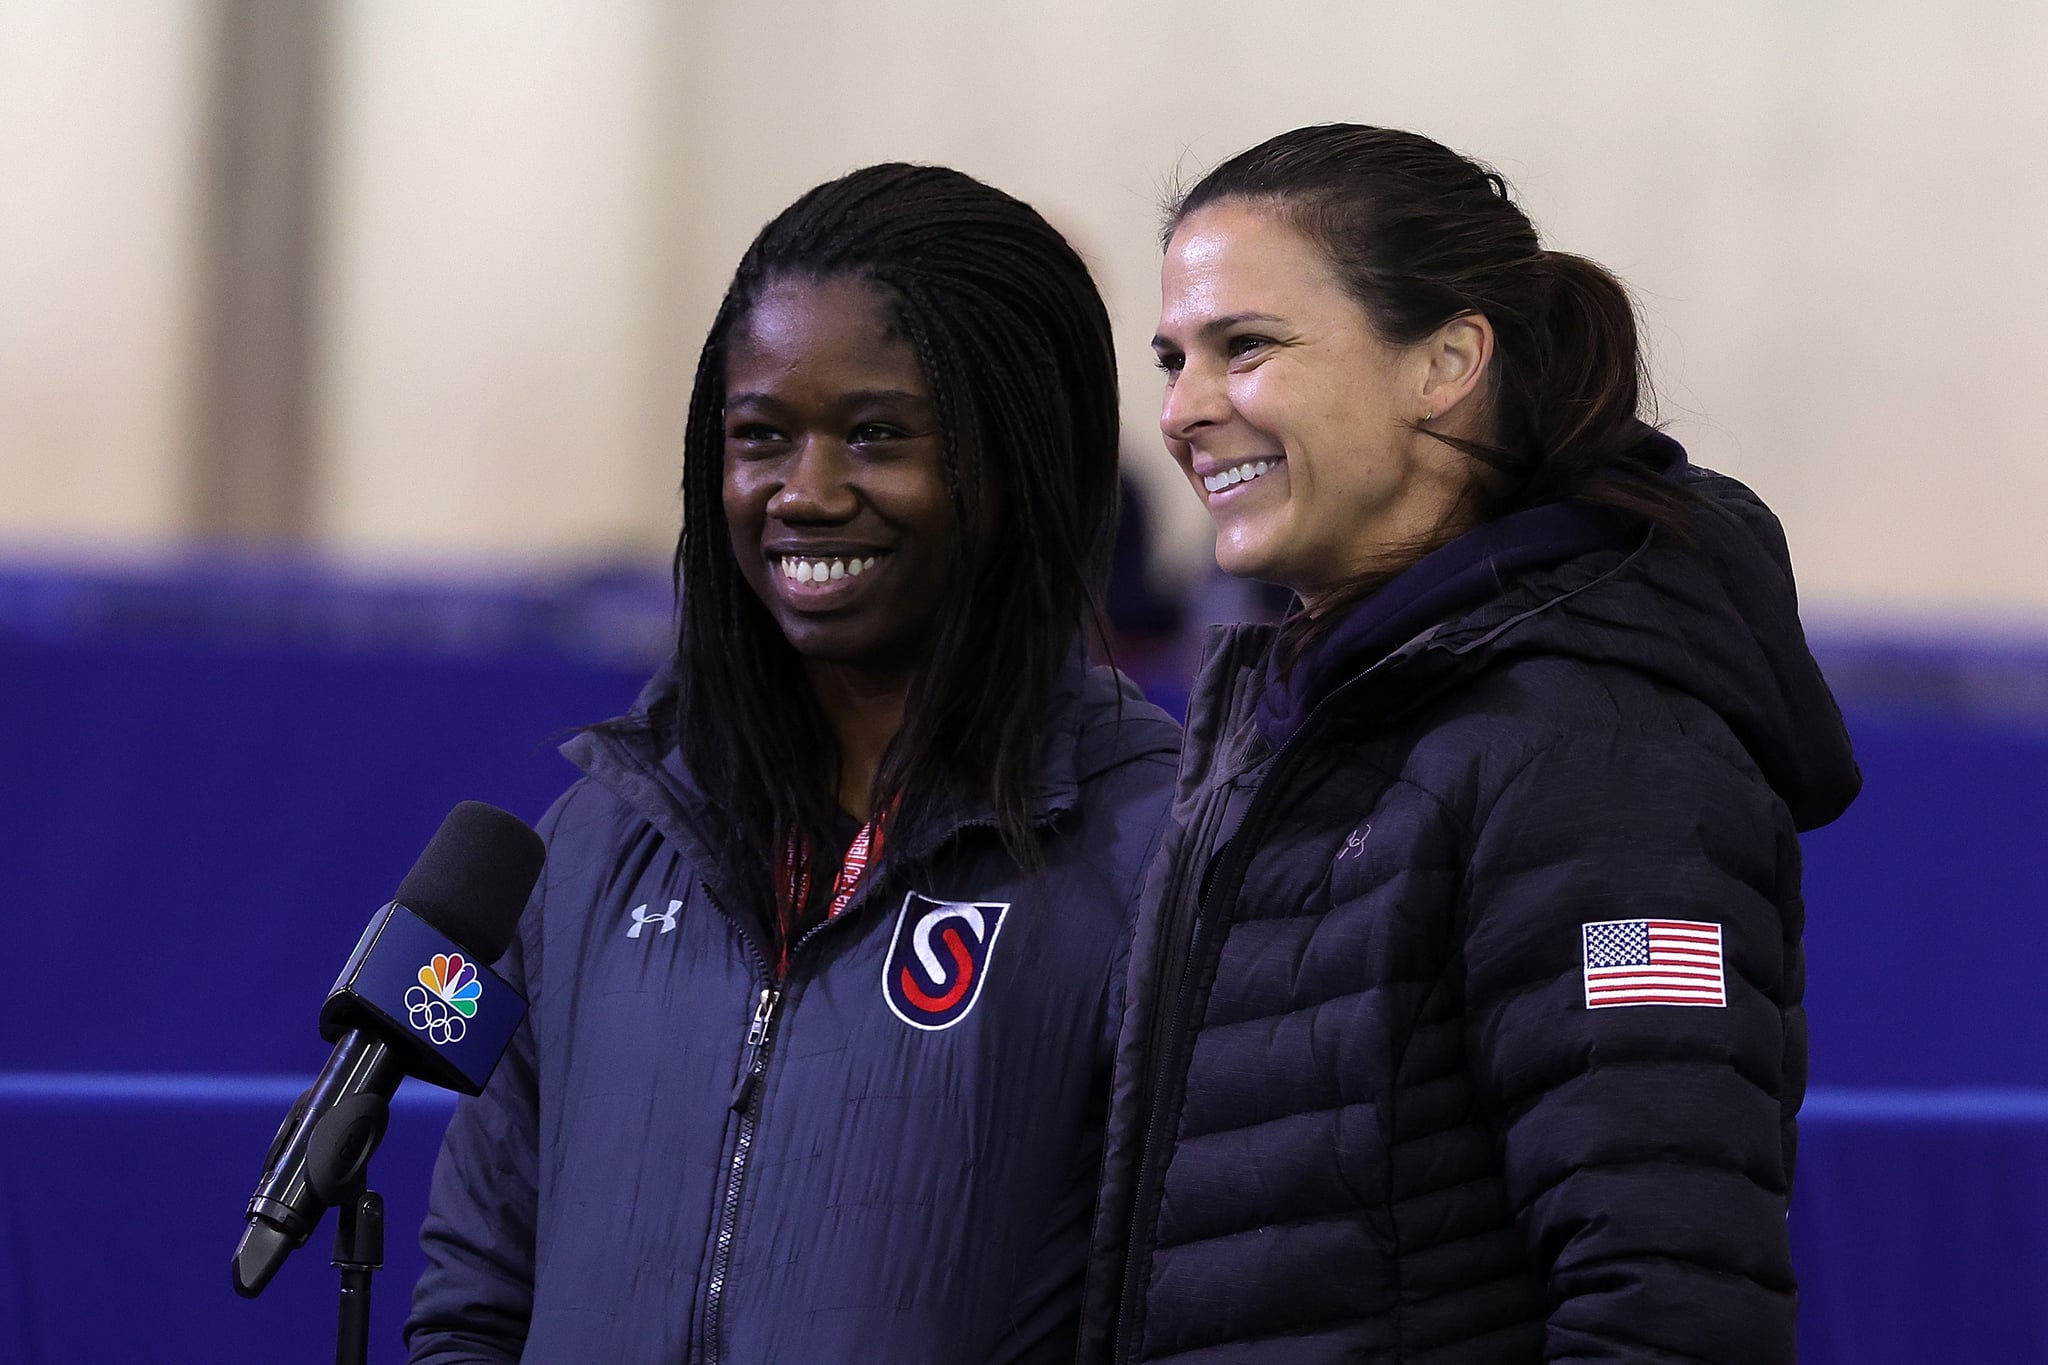 MILWAUKEE, WISCONSIN - JANUARY 09: Erin Jackson and Brittany Bowe speak to the media during the 2022 U.S. Speedskating Long Track Olympic Trials at Pettit National Ice Centre on January 09, 2022 in Milwaukee, Wisconsin. (Photo by Stacy Revere/Getty Images)